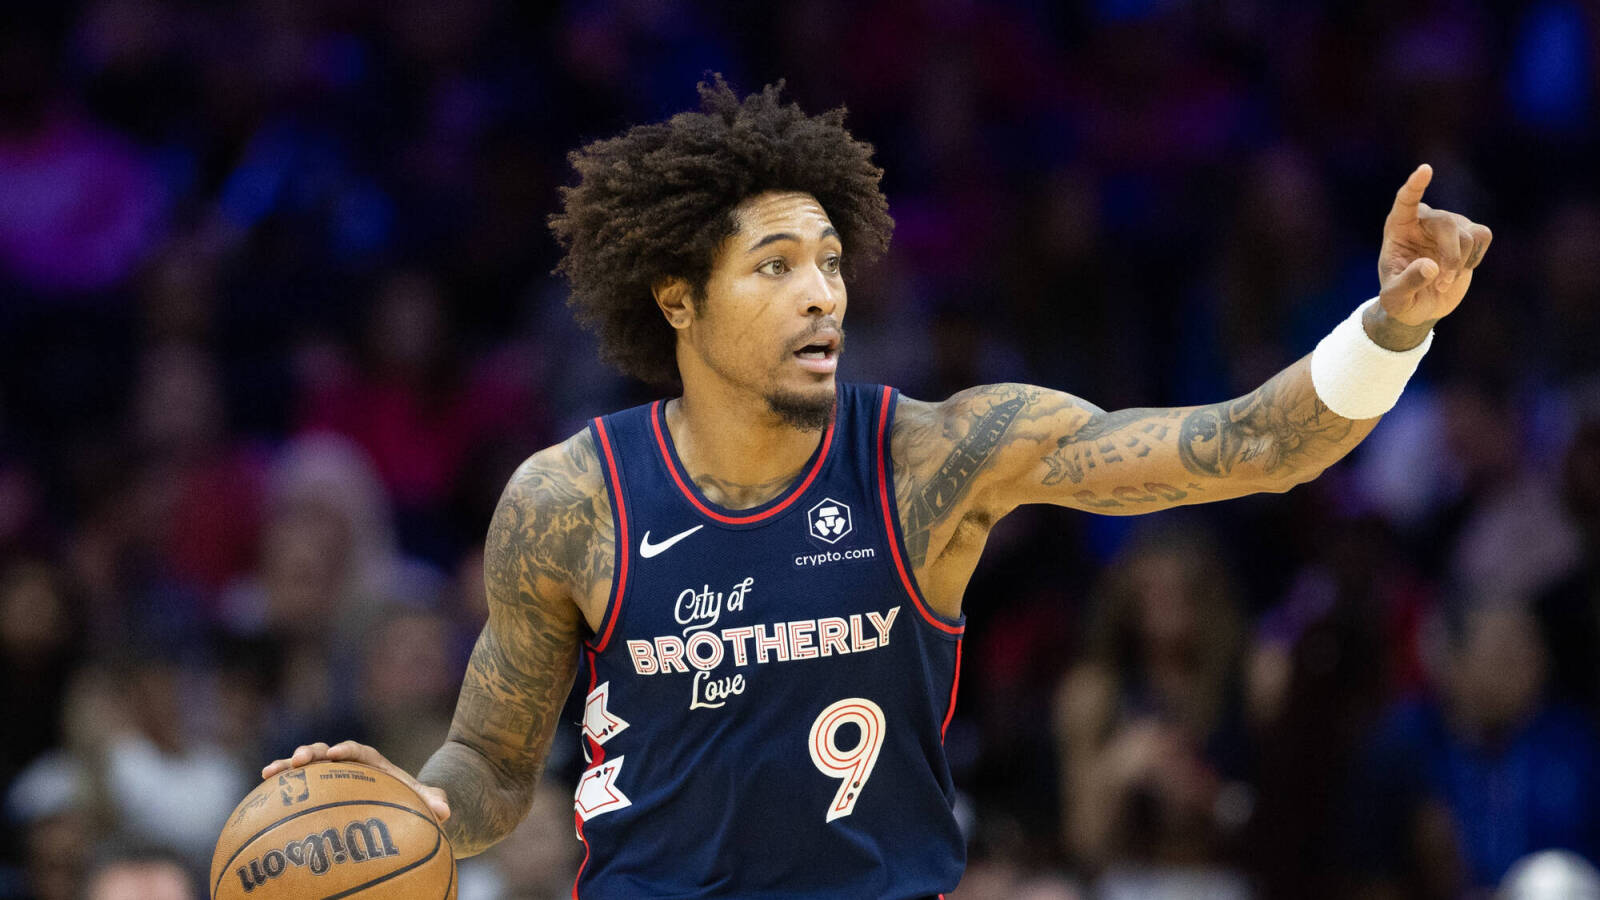 Kelly Oubre Jr. goes off on referees after controversial no-call